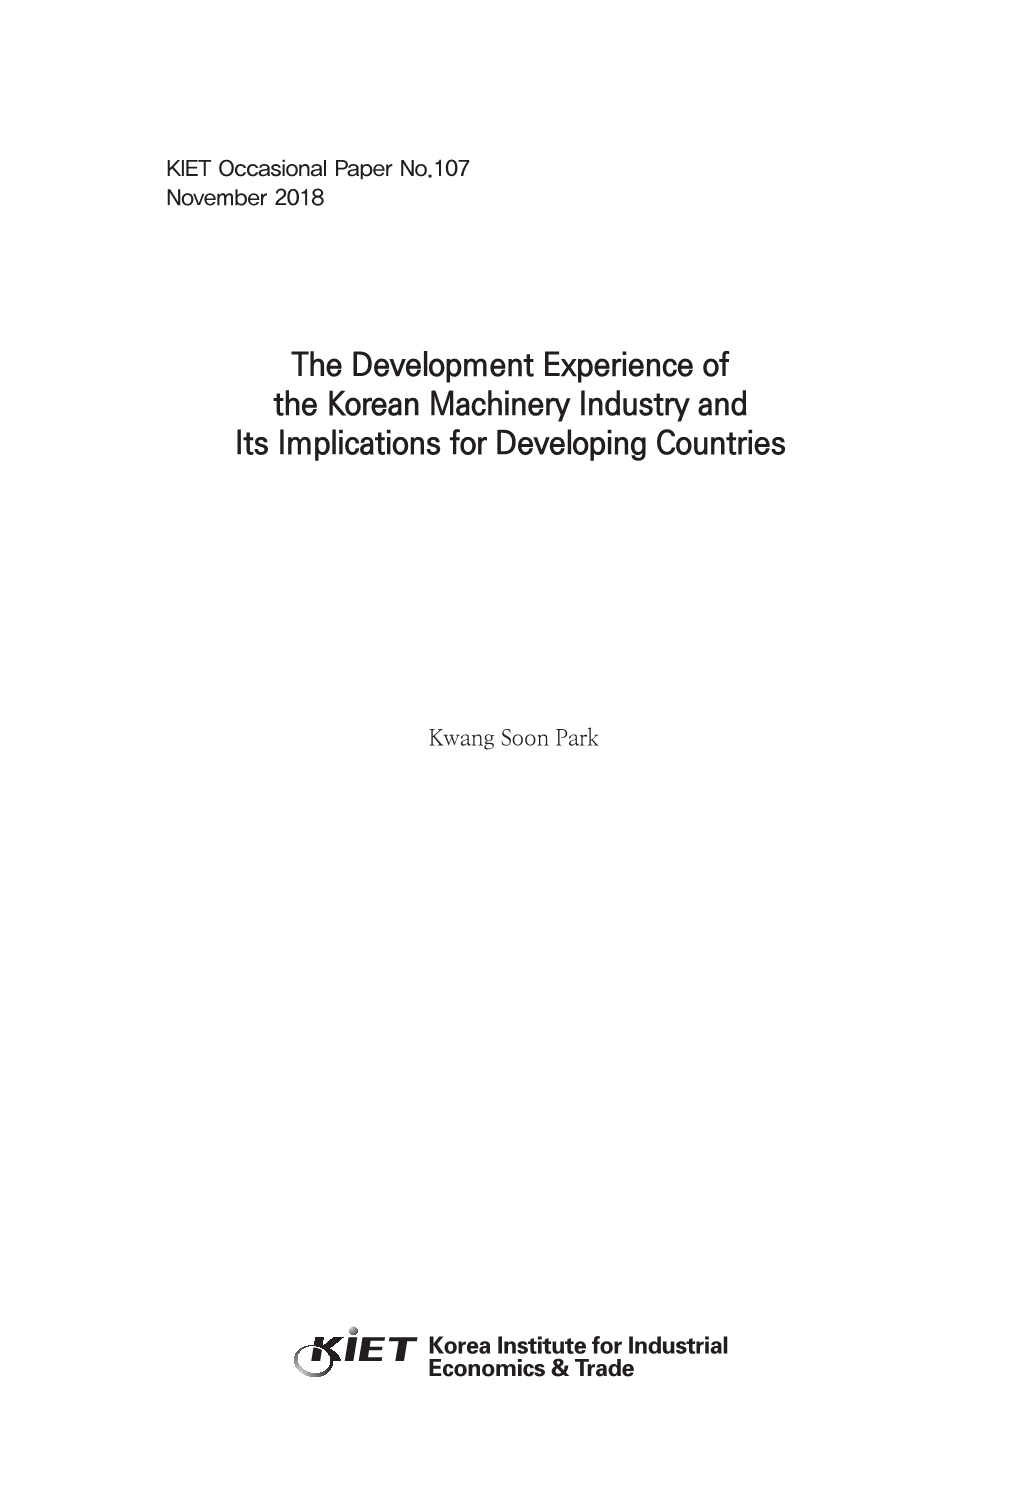 The Development Experience of the Korean Machinery Industry and Its Implications for Developing Countries